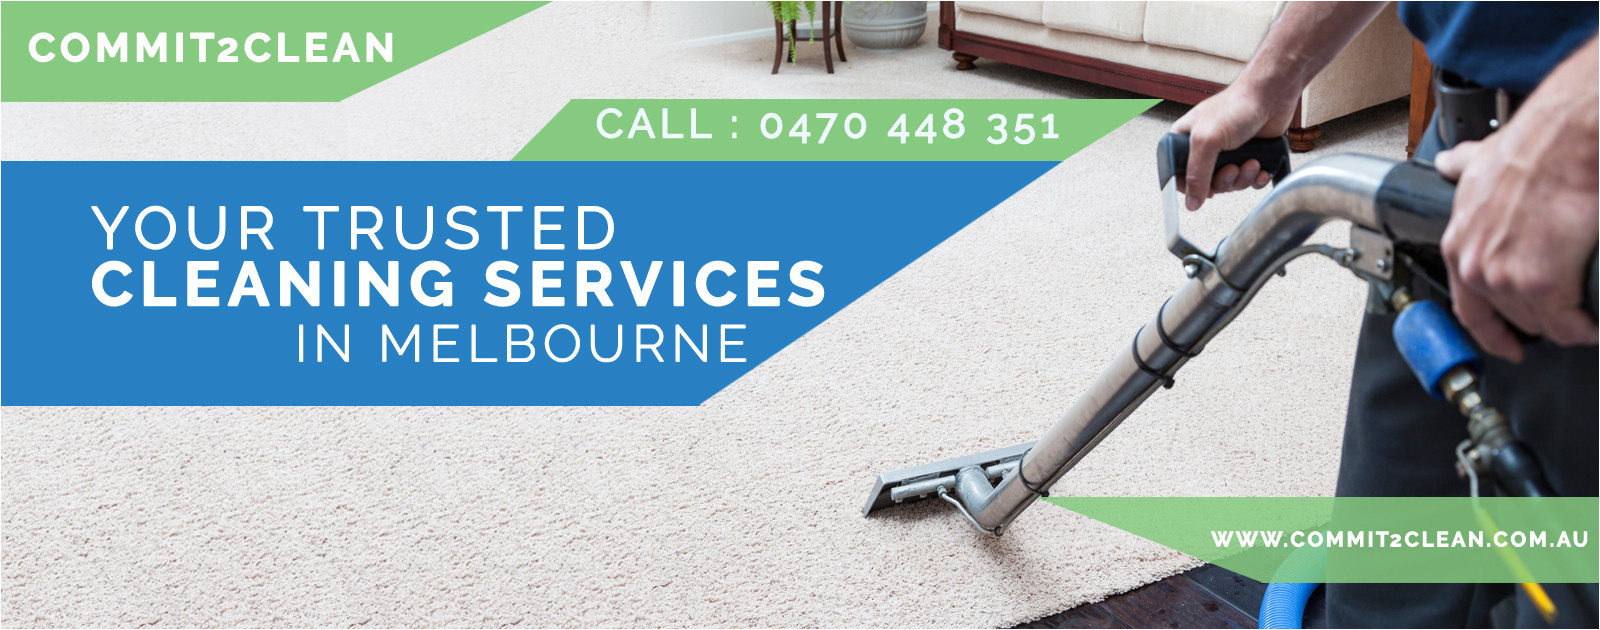 best carpet steam cleaning in melbourne vic commit2clean